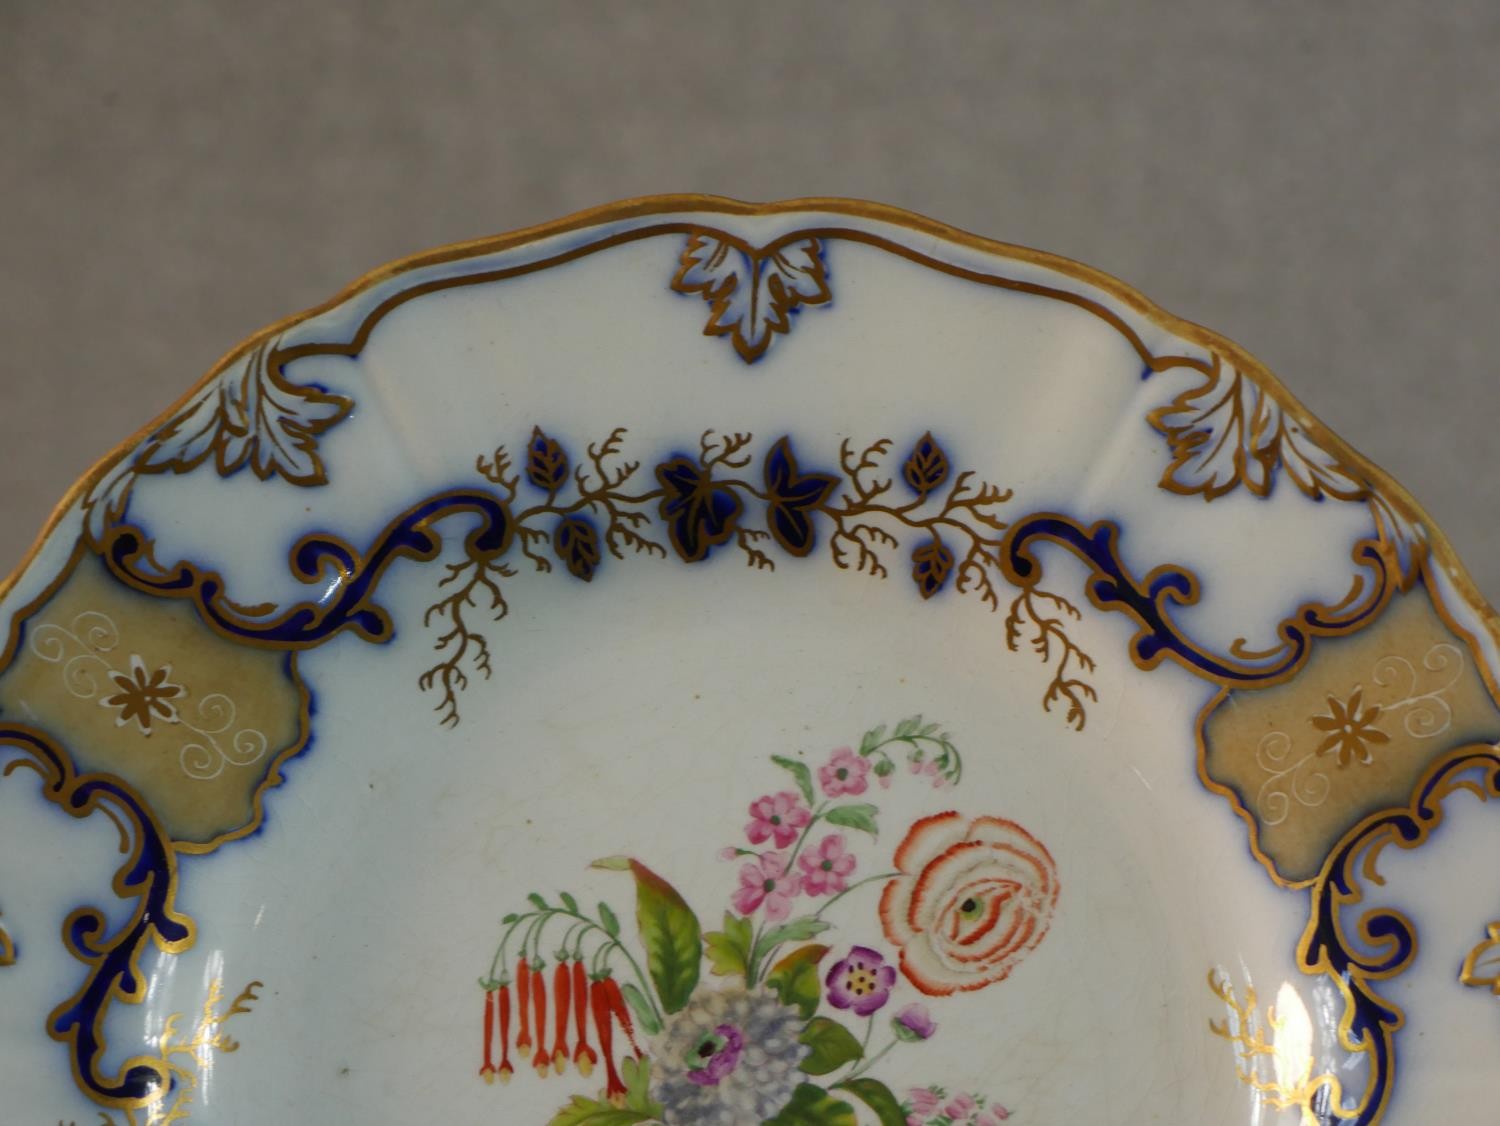 A set of six 19th century Wedwood Pearlware plates, decorated with flowers and gilded detail, - Image 3 of 6